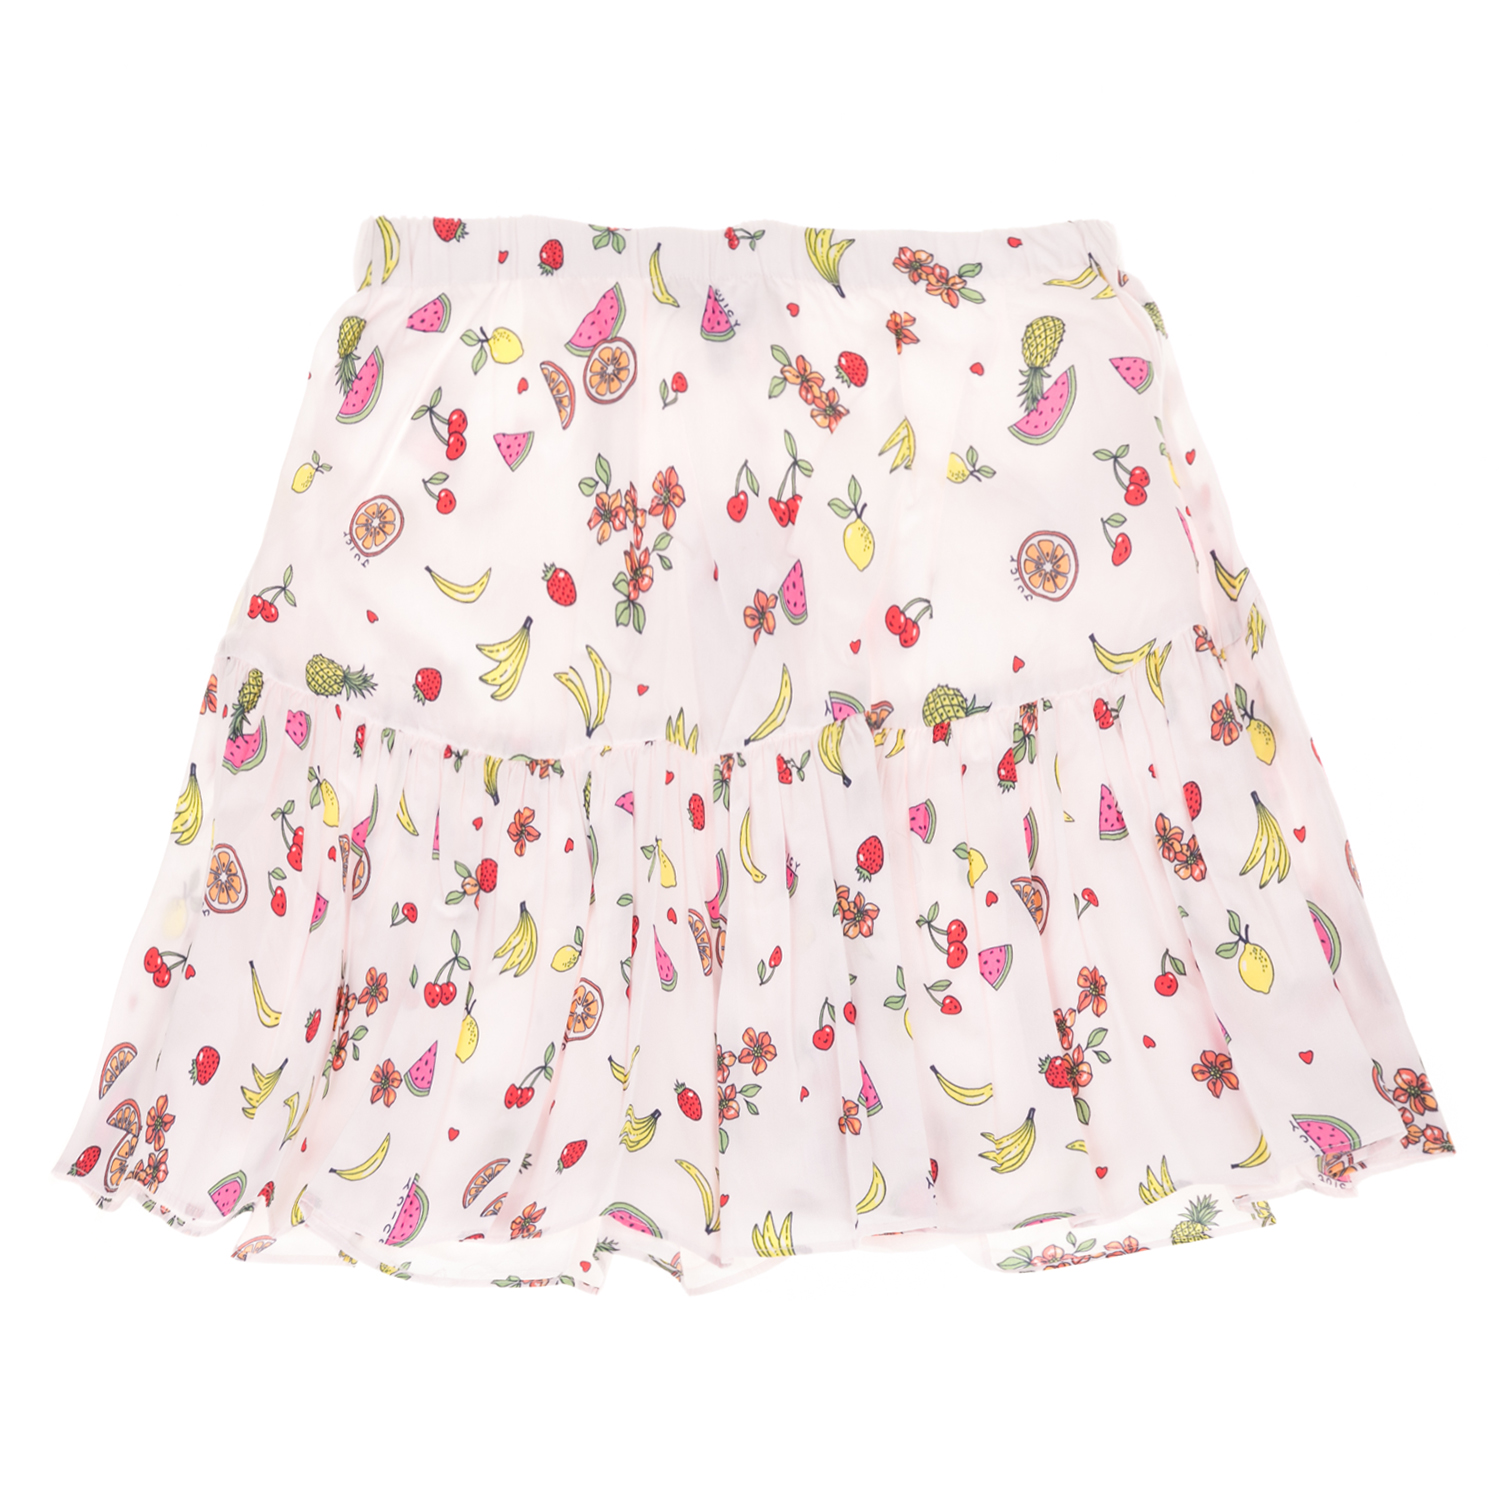 JUICY COUTURE KIDS Παιδική φούστα JUICY COUTURE KIDS FRUIT SALAD λευκή εμπριμέ